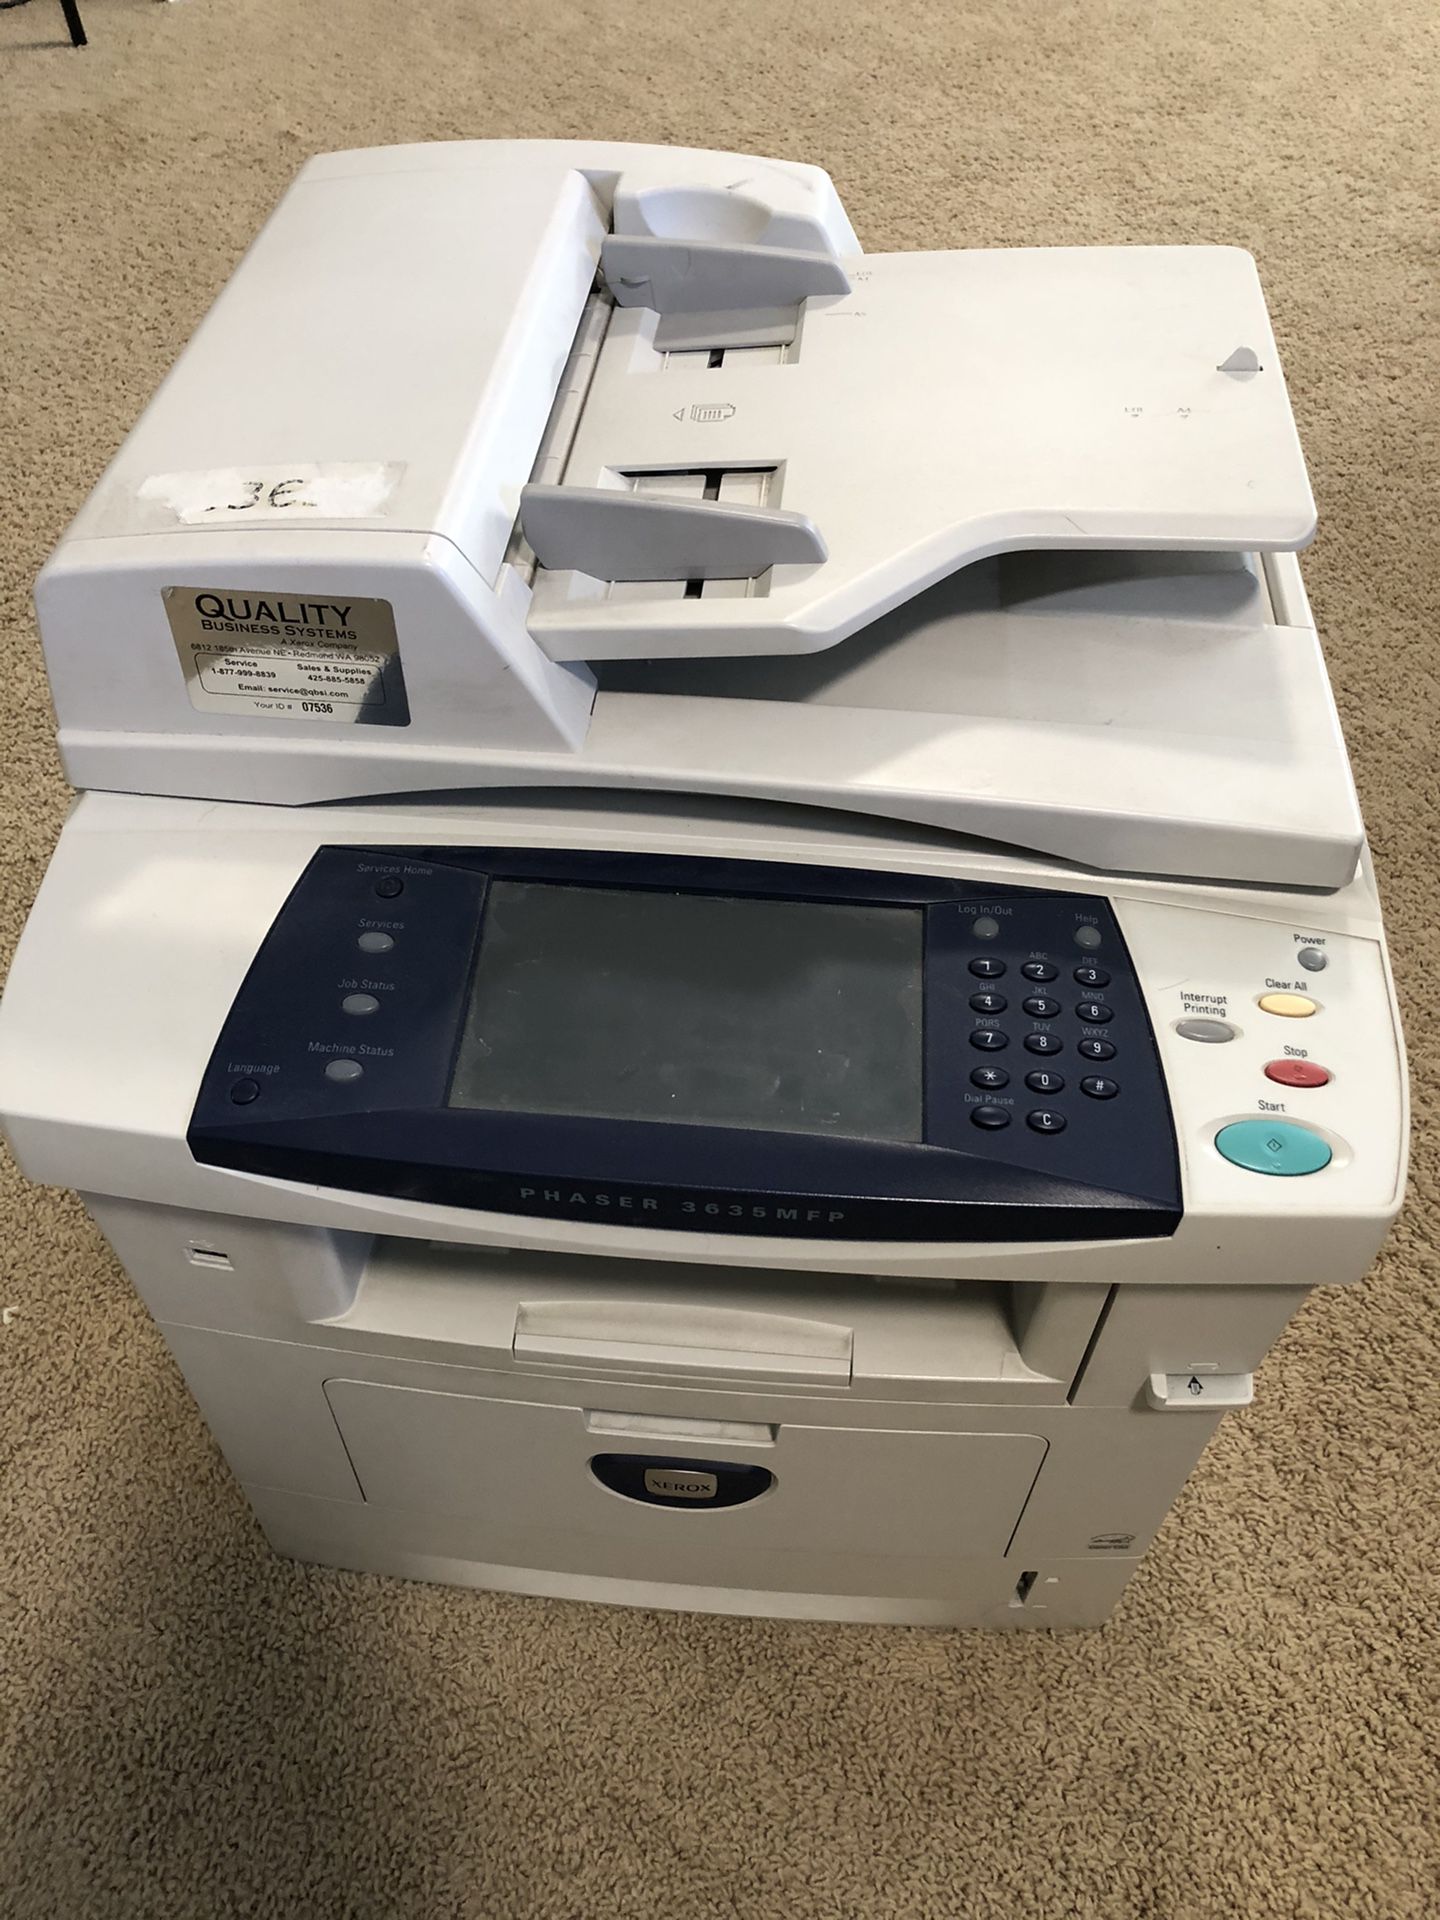 Xerox Phaser 3635MFP All-In-One Laser Printer